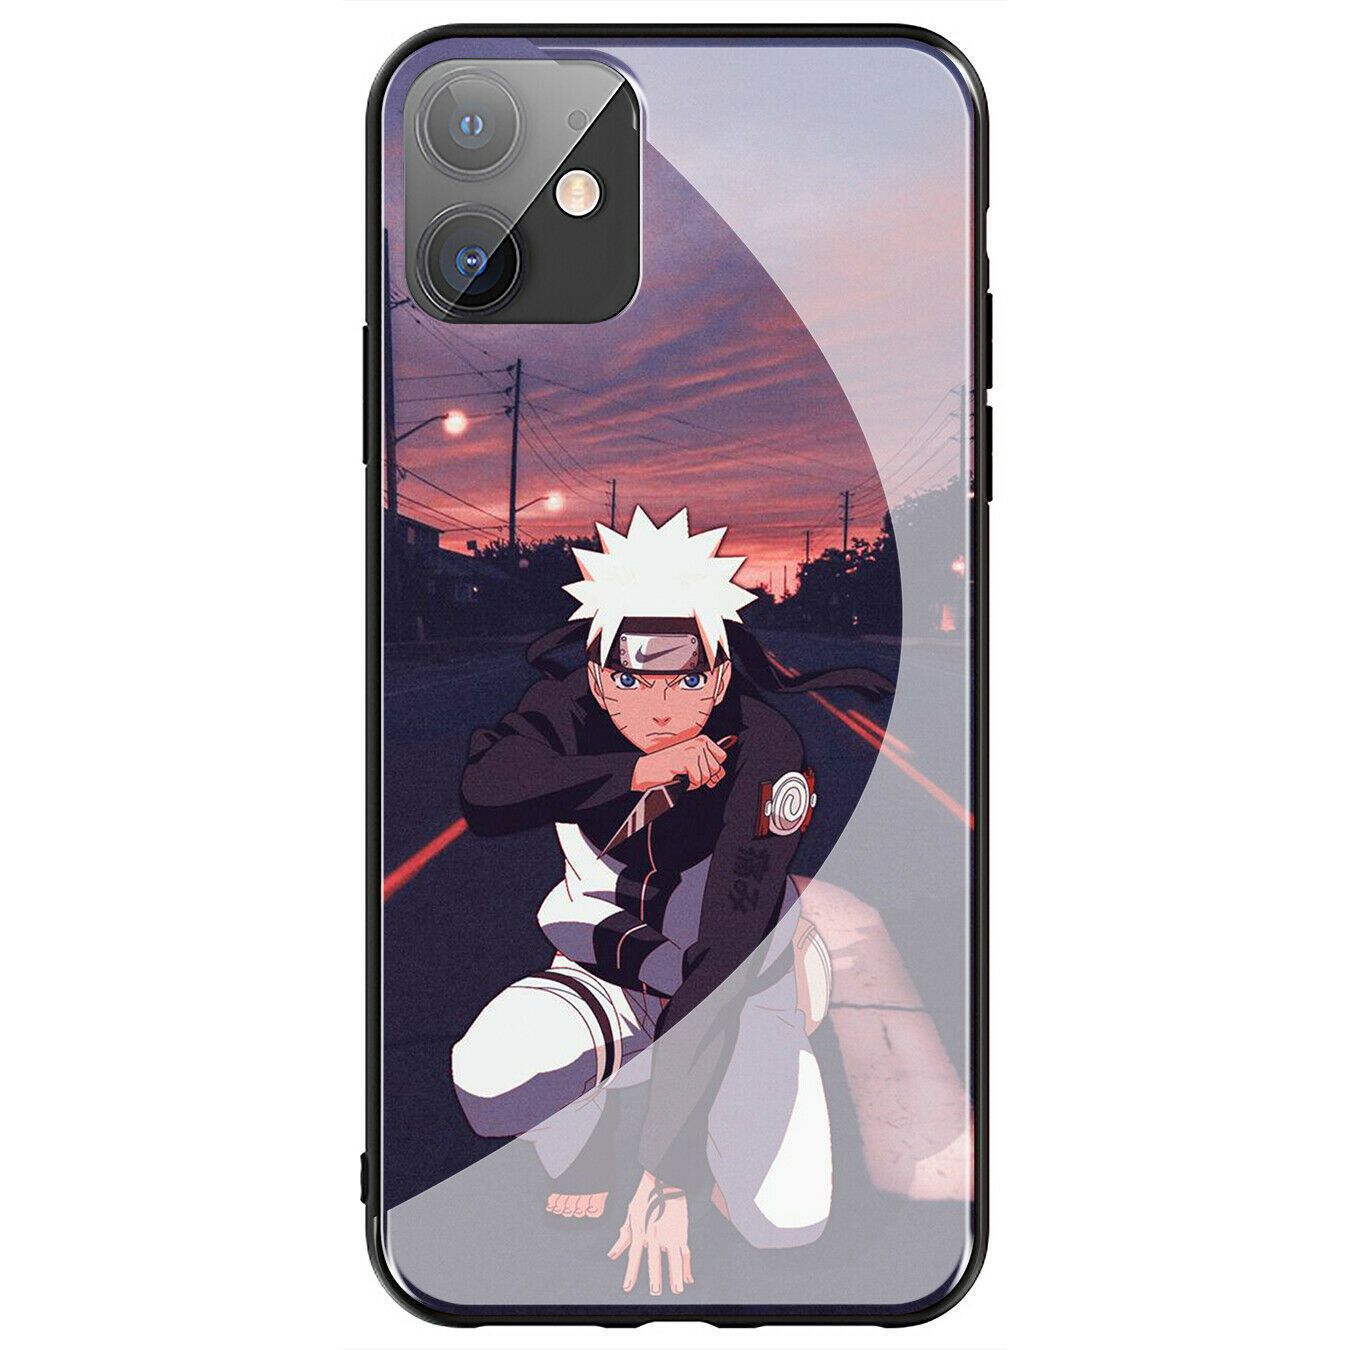 Sasuke NARUTO Akatsuki Glass Case for iPhone 11 Pro XR X XS Max 8 7 6 6s Plus + iPhone Cases AtlasCase 13 for iPhone 6/6S 